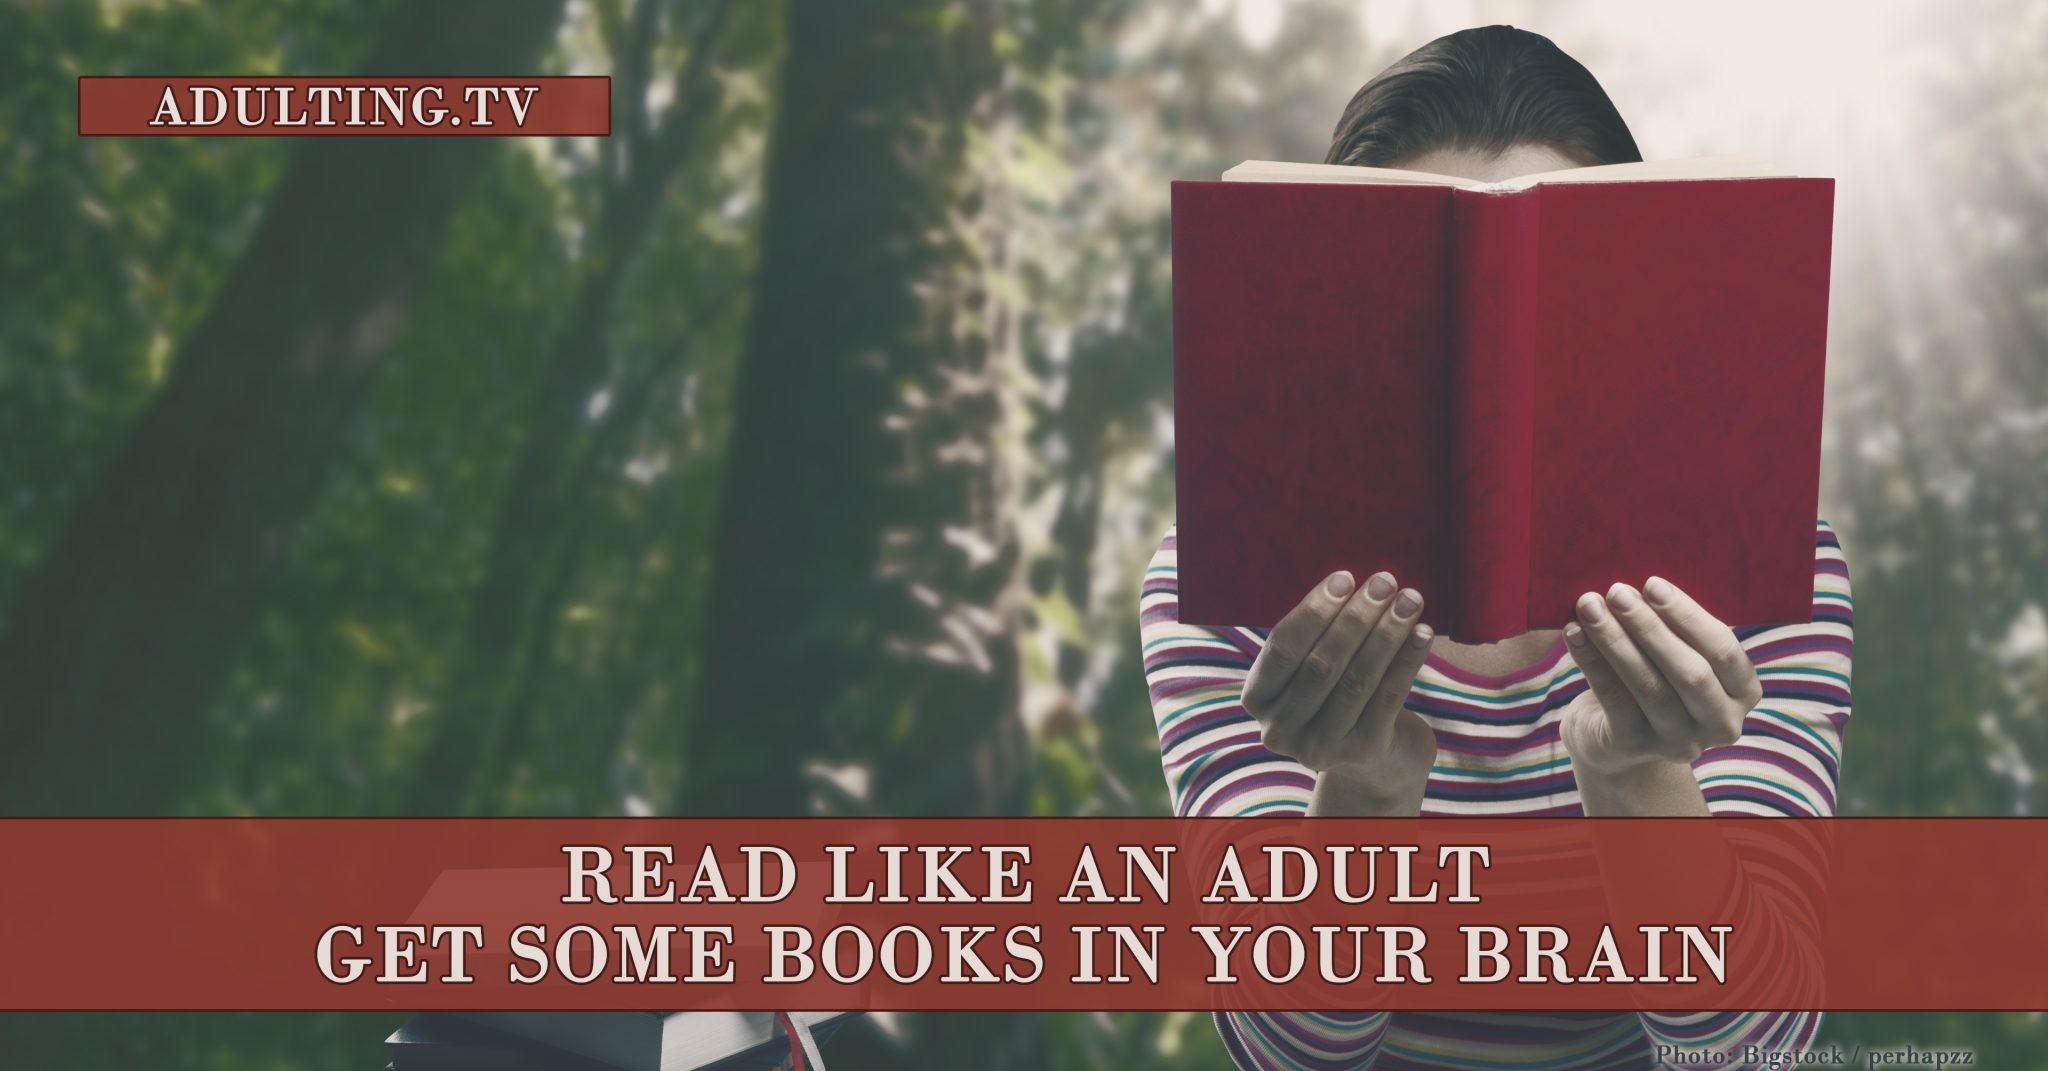 L like reading. I like to read books. Some books. Adulting.